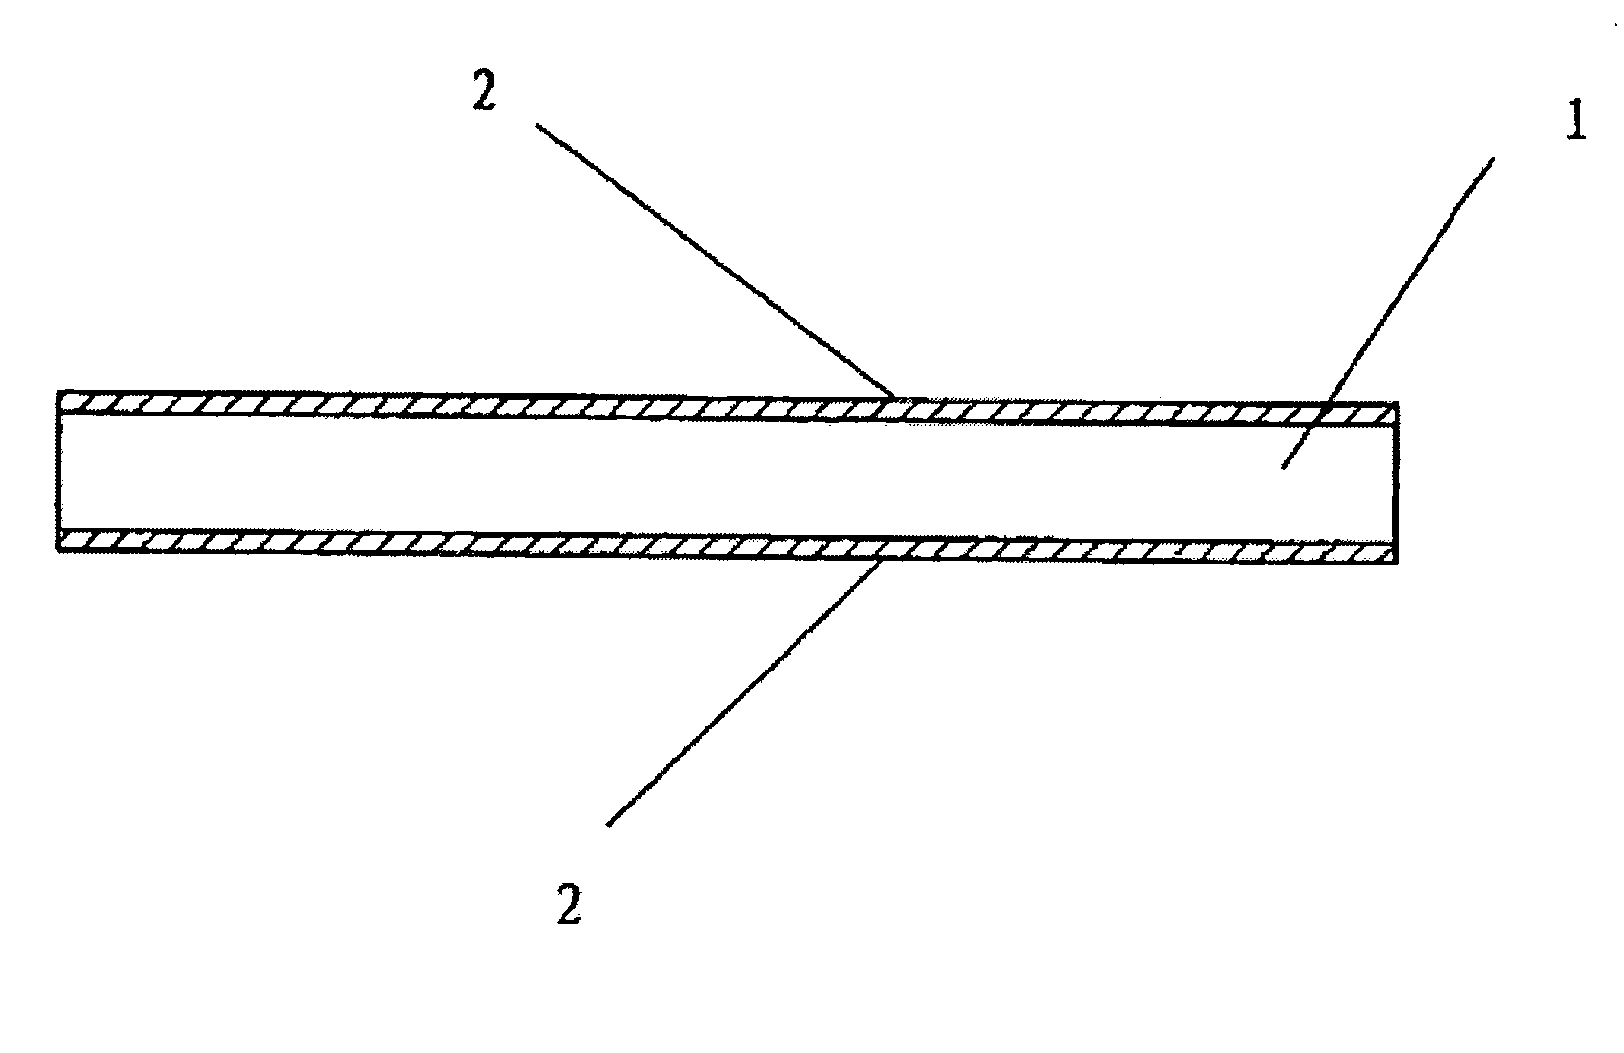 Biological surgical patch and method of making